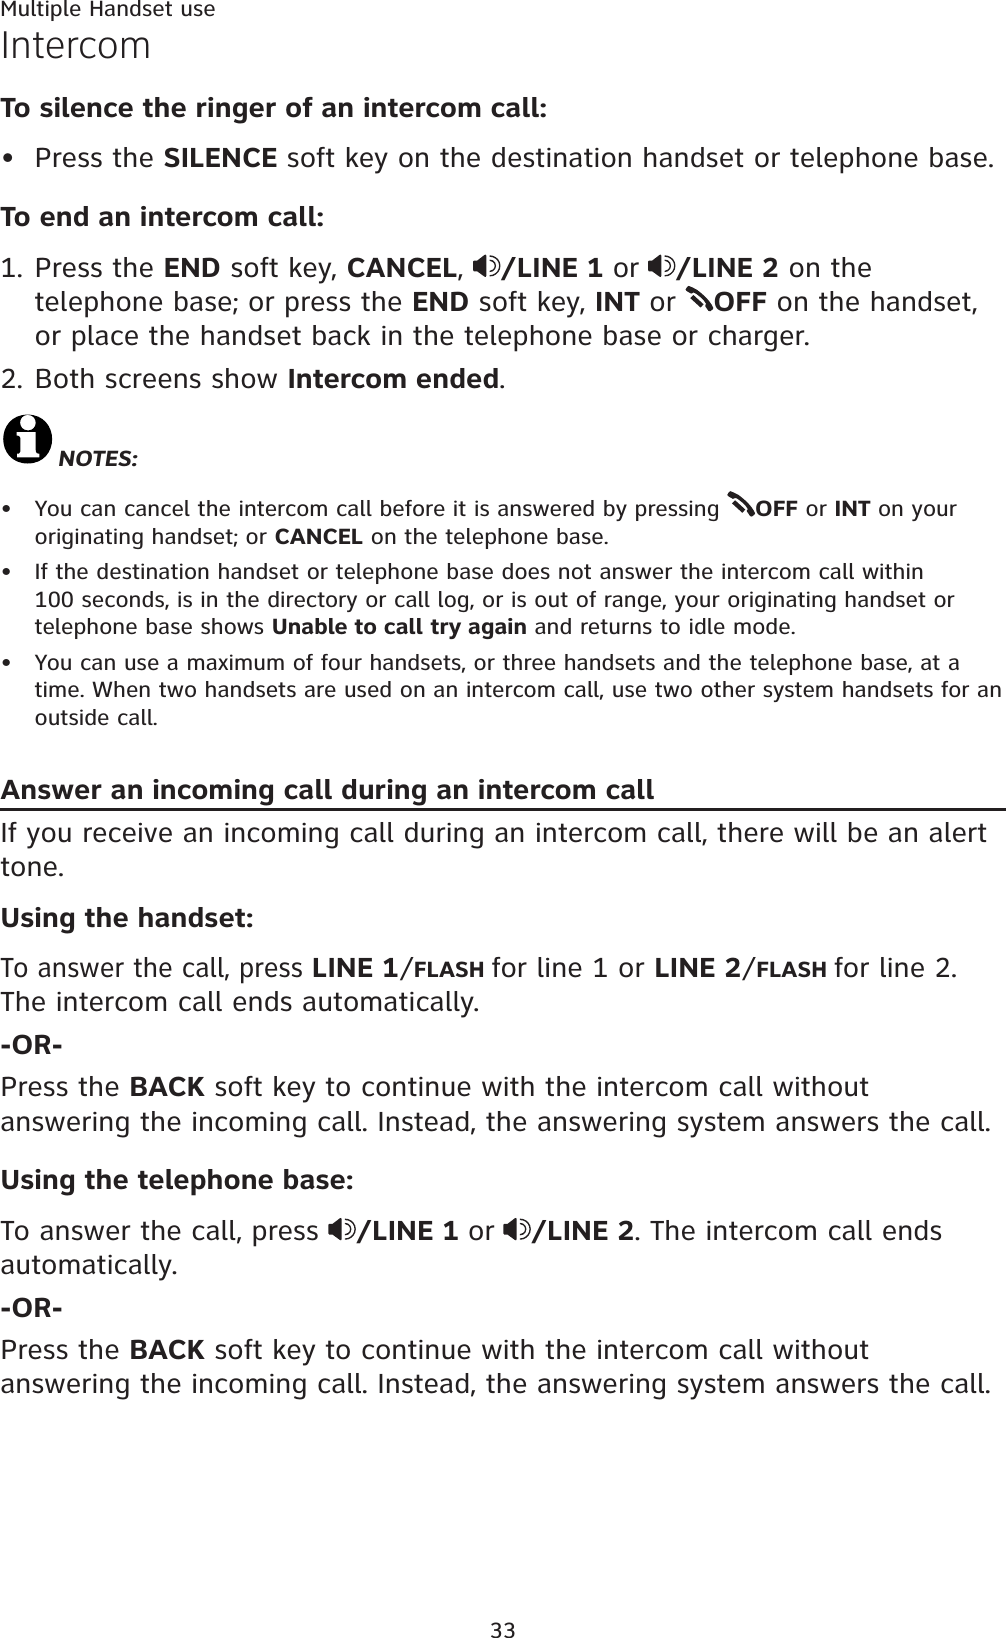 Multiple Handset use33IntercomTo silence the ringer of an intercom call:Press the SILENCE soft key on the destination handset or telephone base.To end an intercom call:1. Press the END soft key, CANCEL,/LINE 1 or /LINE 2 on the telephone base; or press the END soft key, INT or  OFF on the handset, or place the handset back in the telephone base or charger.2. Both screens show Intercom ended.NOTES:You can cancel the intercom call before it is answered by pressing  OFF or INT on your originating handset; or CANCEL on the telephone base.If the destination handset or telephone base does not answer the intercom call within 100 seconds, is in the directory or call log, or is out of range, your originating handset or telephone base shows Unable to call try again and returns to idle mode.You can use a maximum of four handsets, or three handsets and the telephone base, at a time. When two handsets are used on an intercom call, use two other system handsets for an outside call.Answer an incoming call during an intercom callIf you receive an incoming call during an intercom call, there will be an alert tone.Using the handset:To answer the call, press LINE 1/FLASH for line 1 or LINE 2/FLASH for line 2. The intercom call ends automatically.-OR-Press the BACK soft key to continue with the intercom call without answering the incoming call. Instead, the answering system answers the call.Using the telephone base:To answer the call, press  /LINE 1 or /LINE 2. The intercom call ends automatically.-OR-Press the BACK soft key to continue with the intercom call without answering the incoming call. Instead, the answering system answers the call.••••